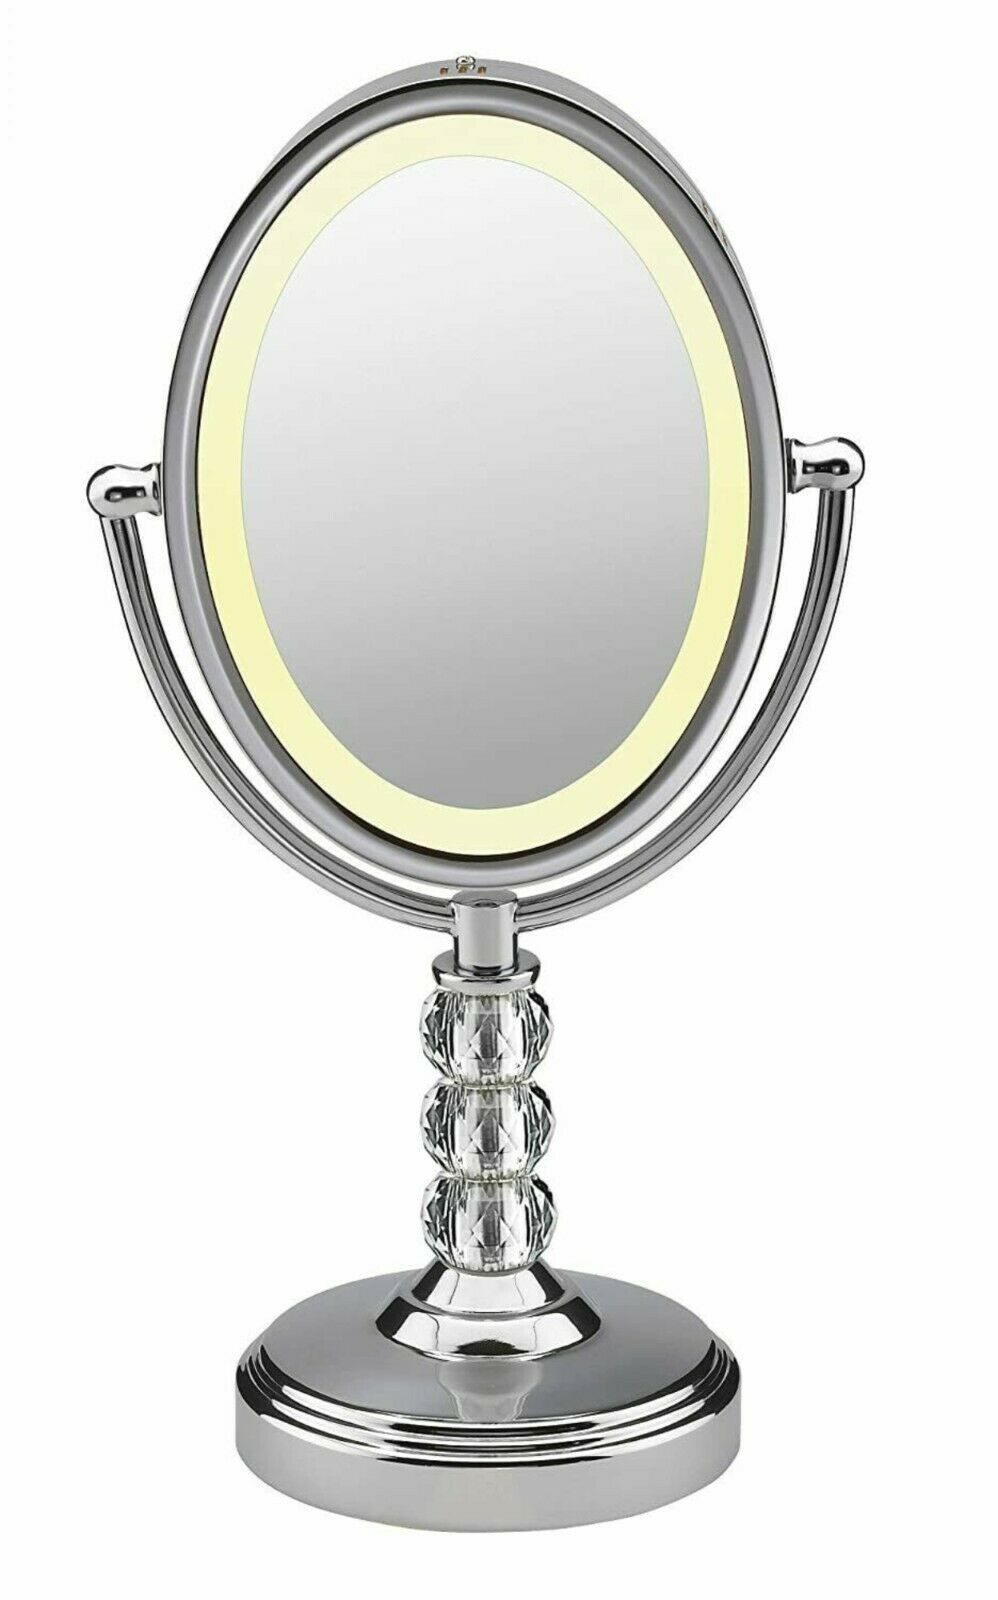 Conair Double Sided Lighted Vanity Mirror With Led Lights, 1x/7x Intended For Chrome Led Magnified Makeup Mirrors (View 3 of 15)